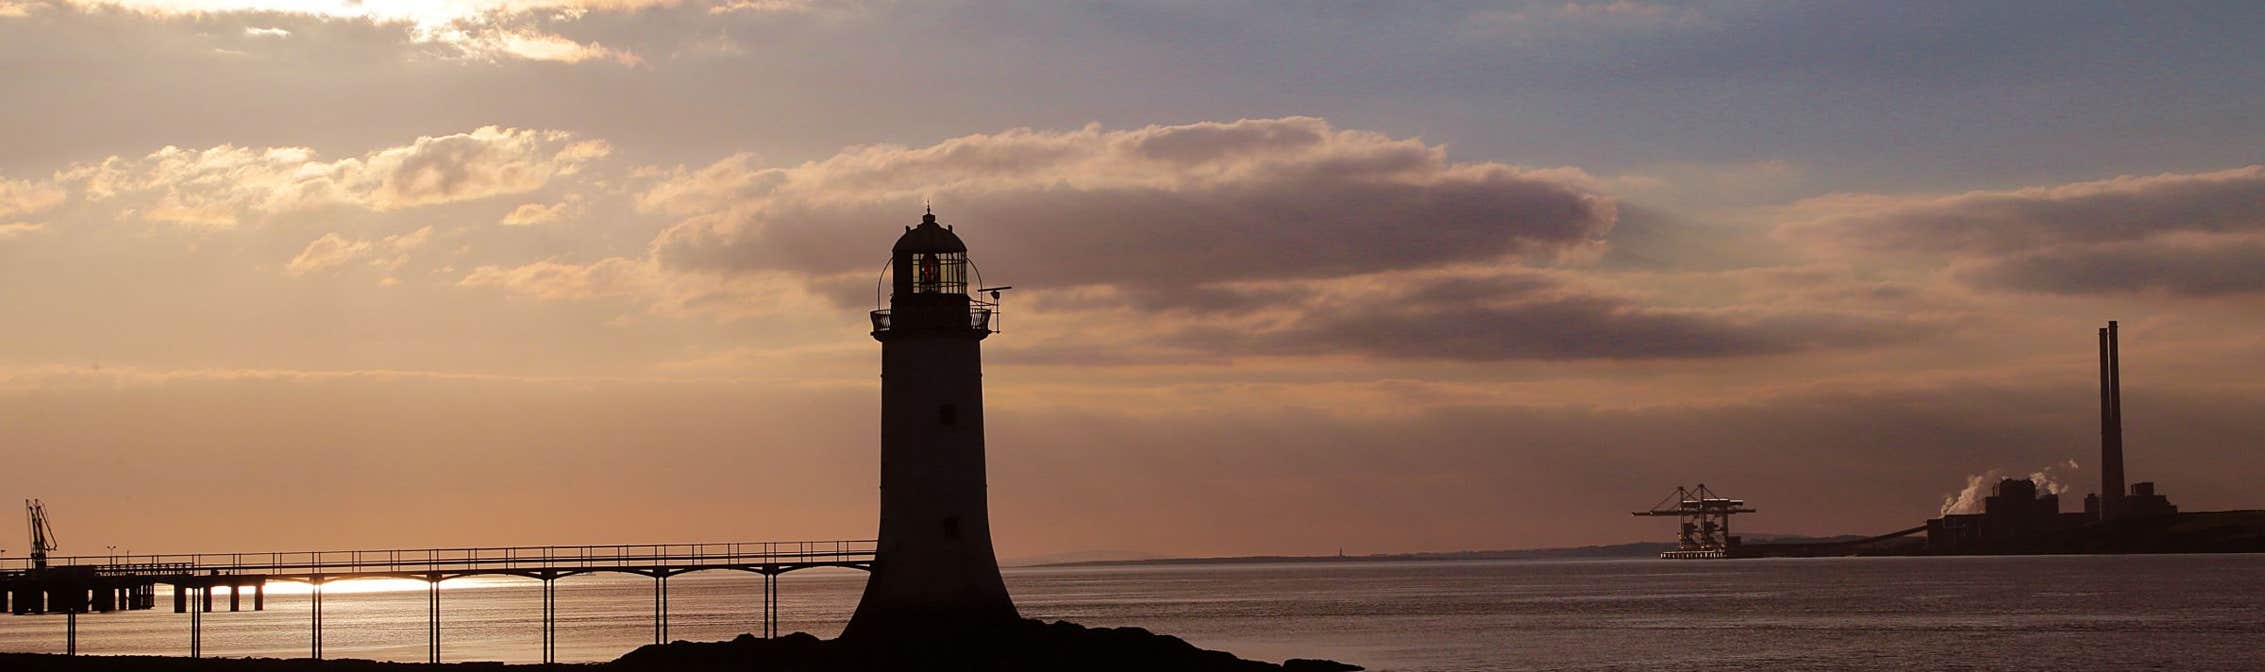 Image of a lighthouse in Tarbert in County Kerry